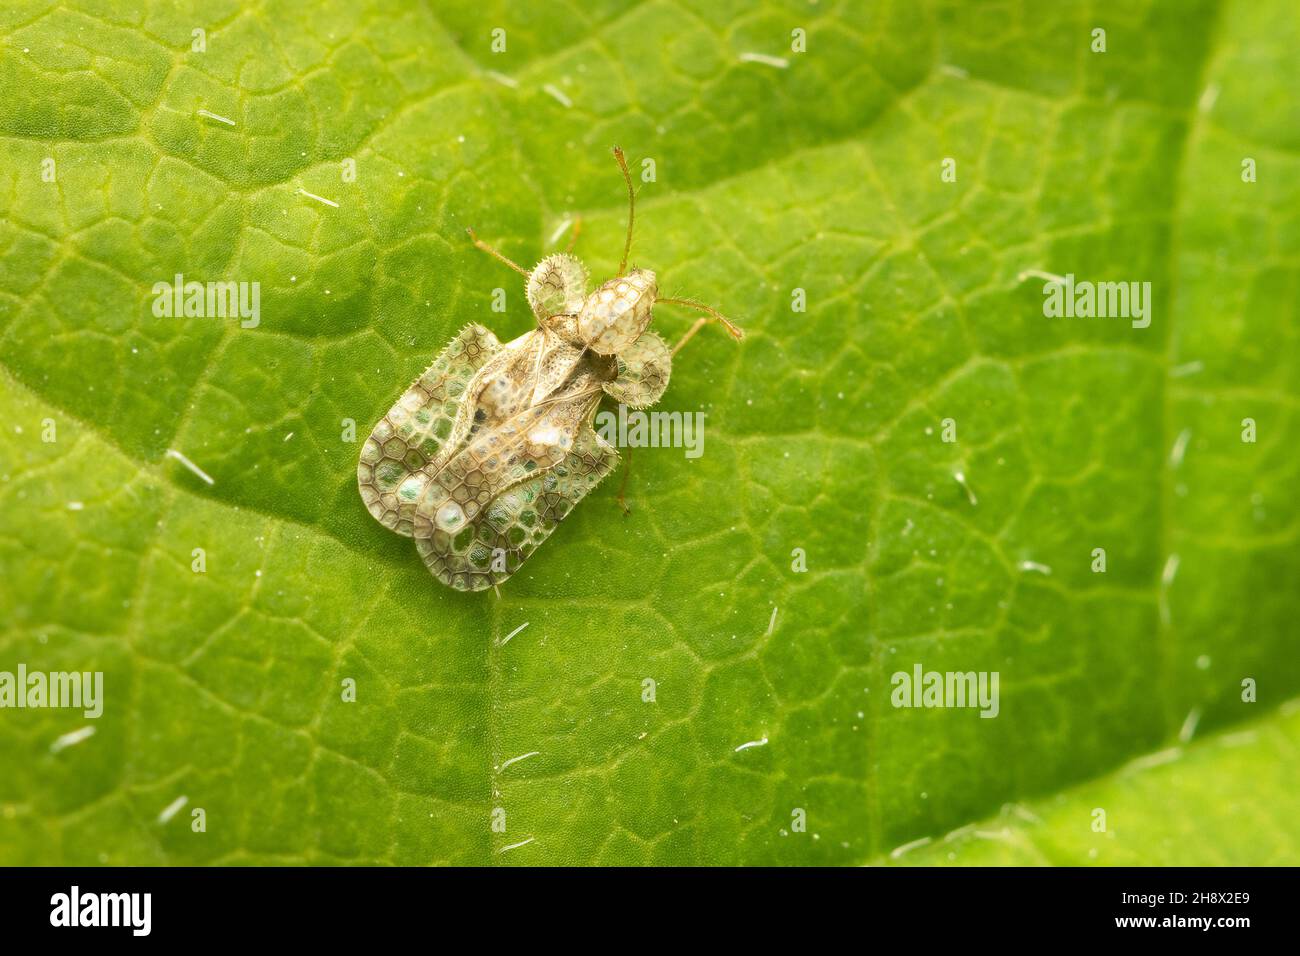 Top View on Chrysanthemum Lace Bug resting on a green leaf with copy space Stock Photo